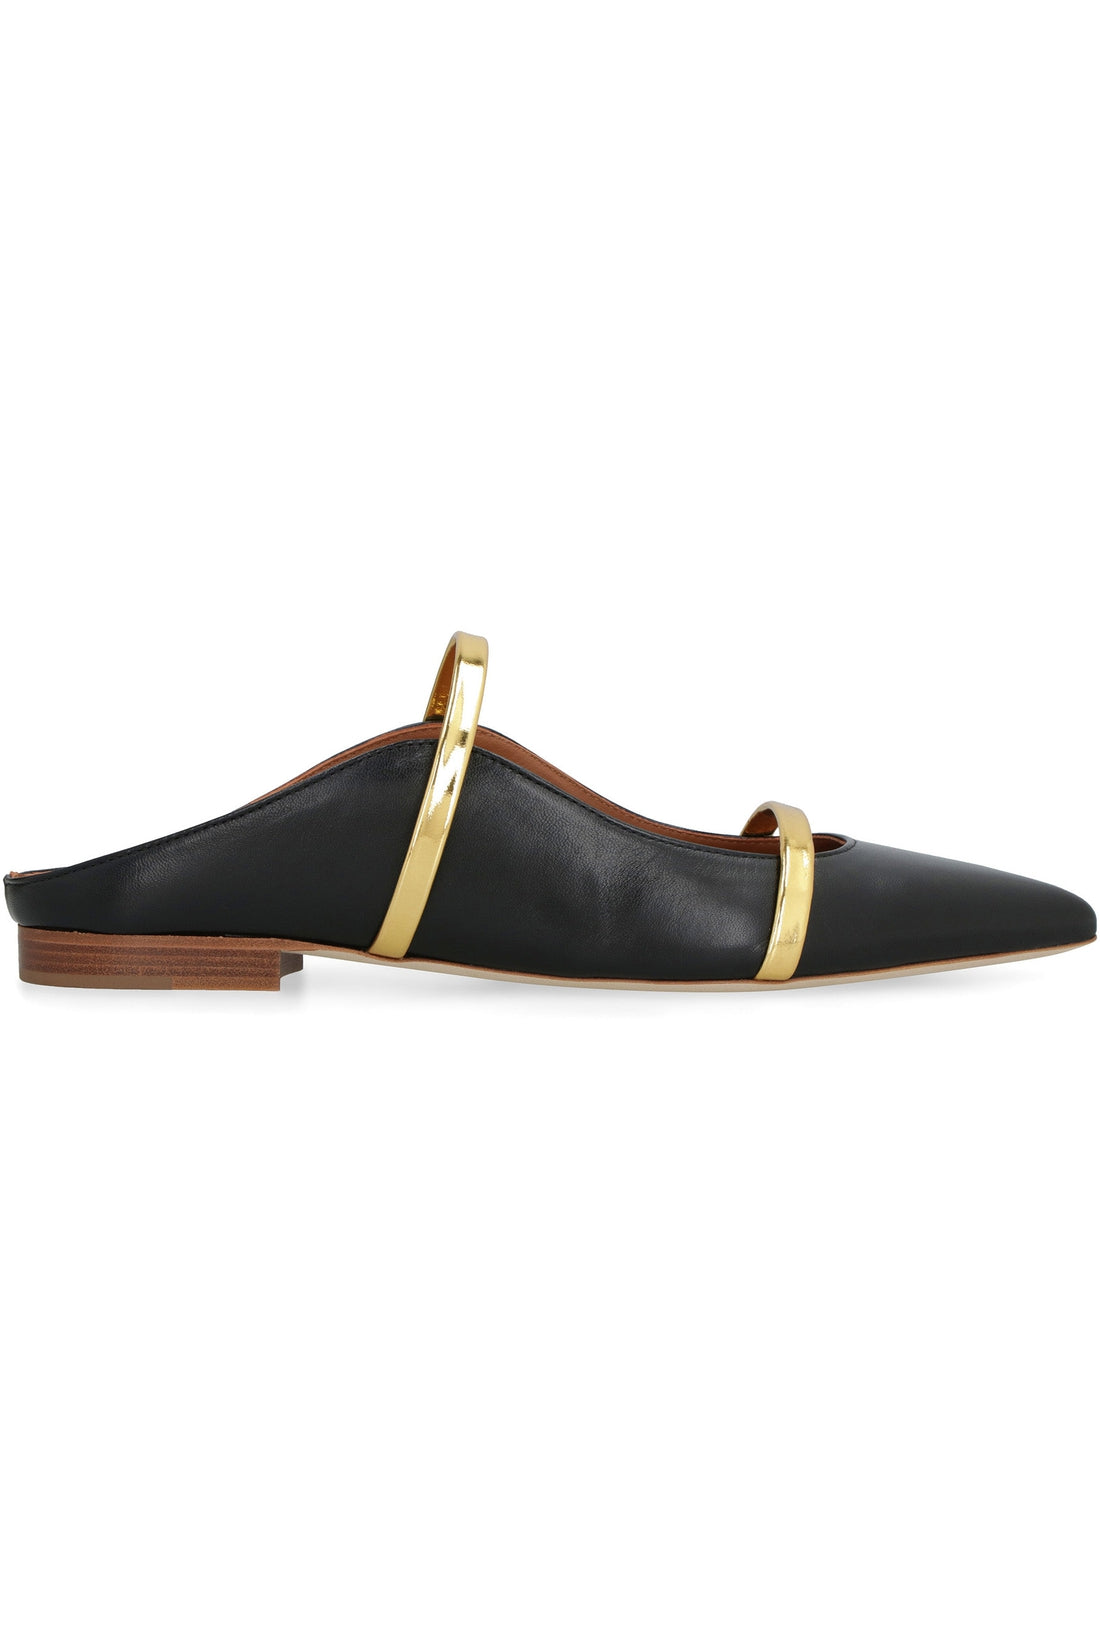 Malone Souliers-OUTLET-SALE-Maureen Flat pointy-toe flats-ARCHIVIST